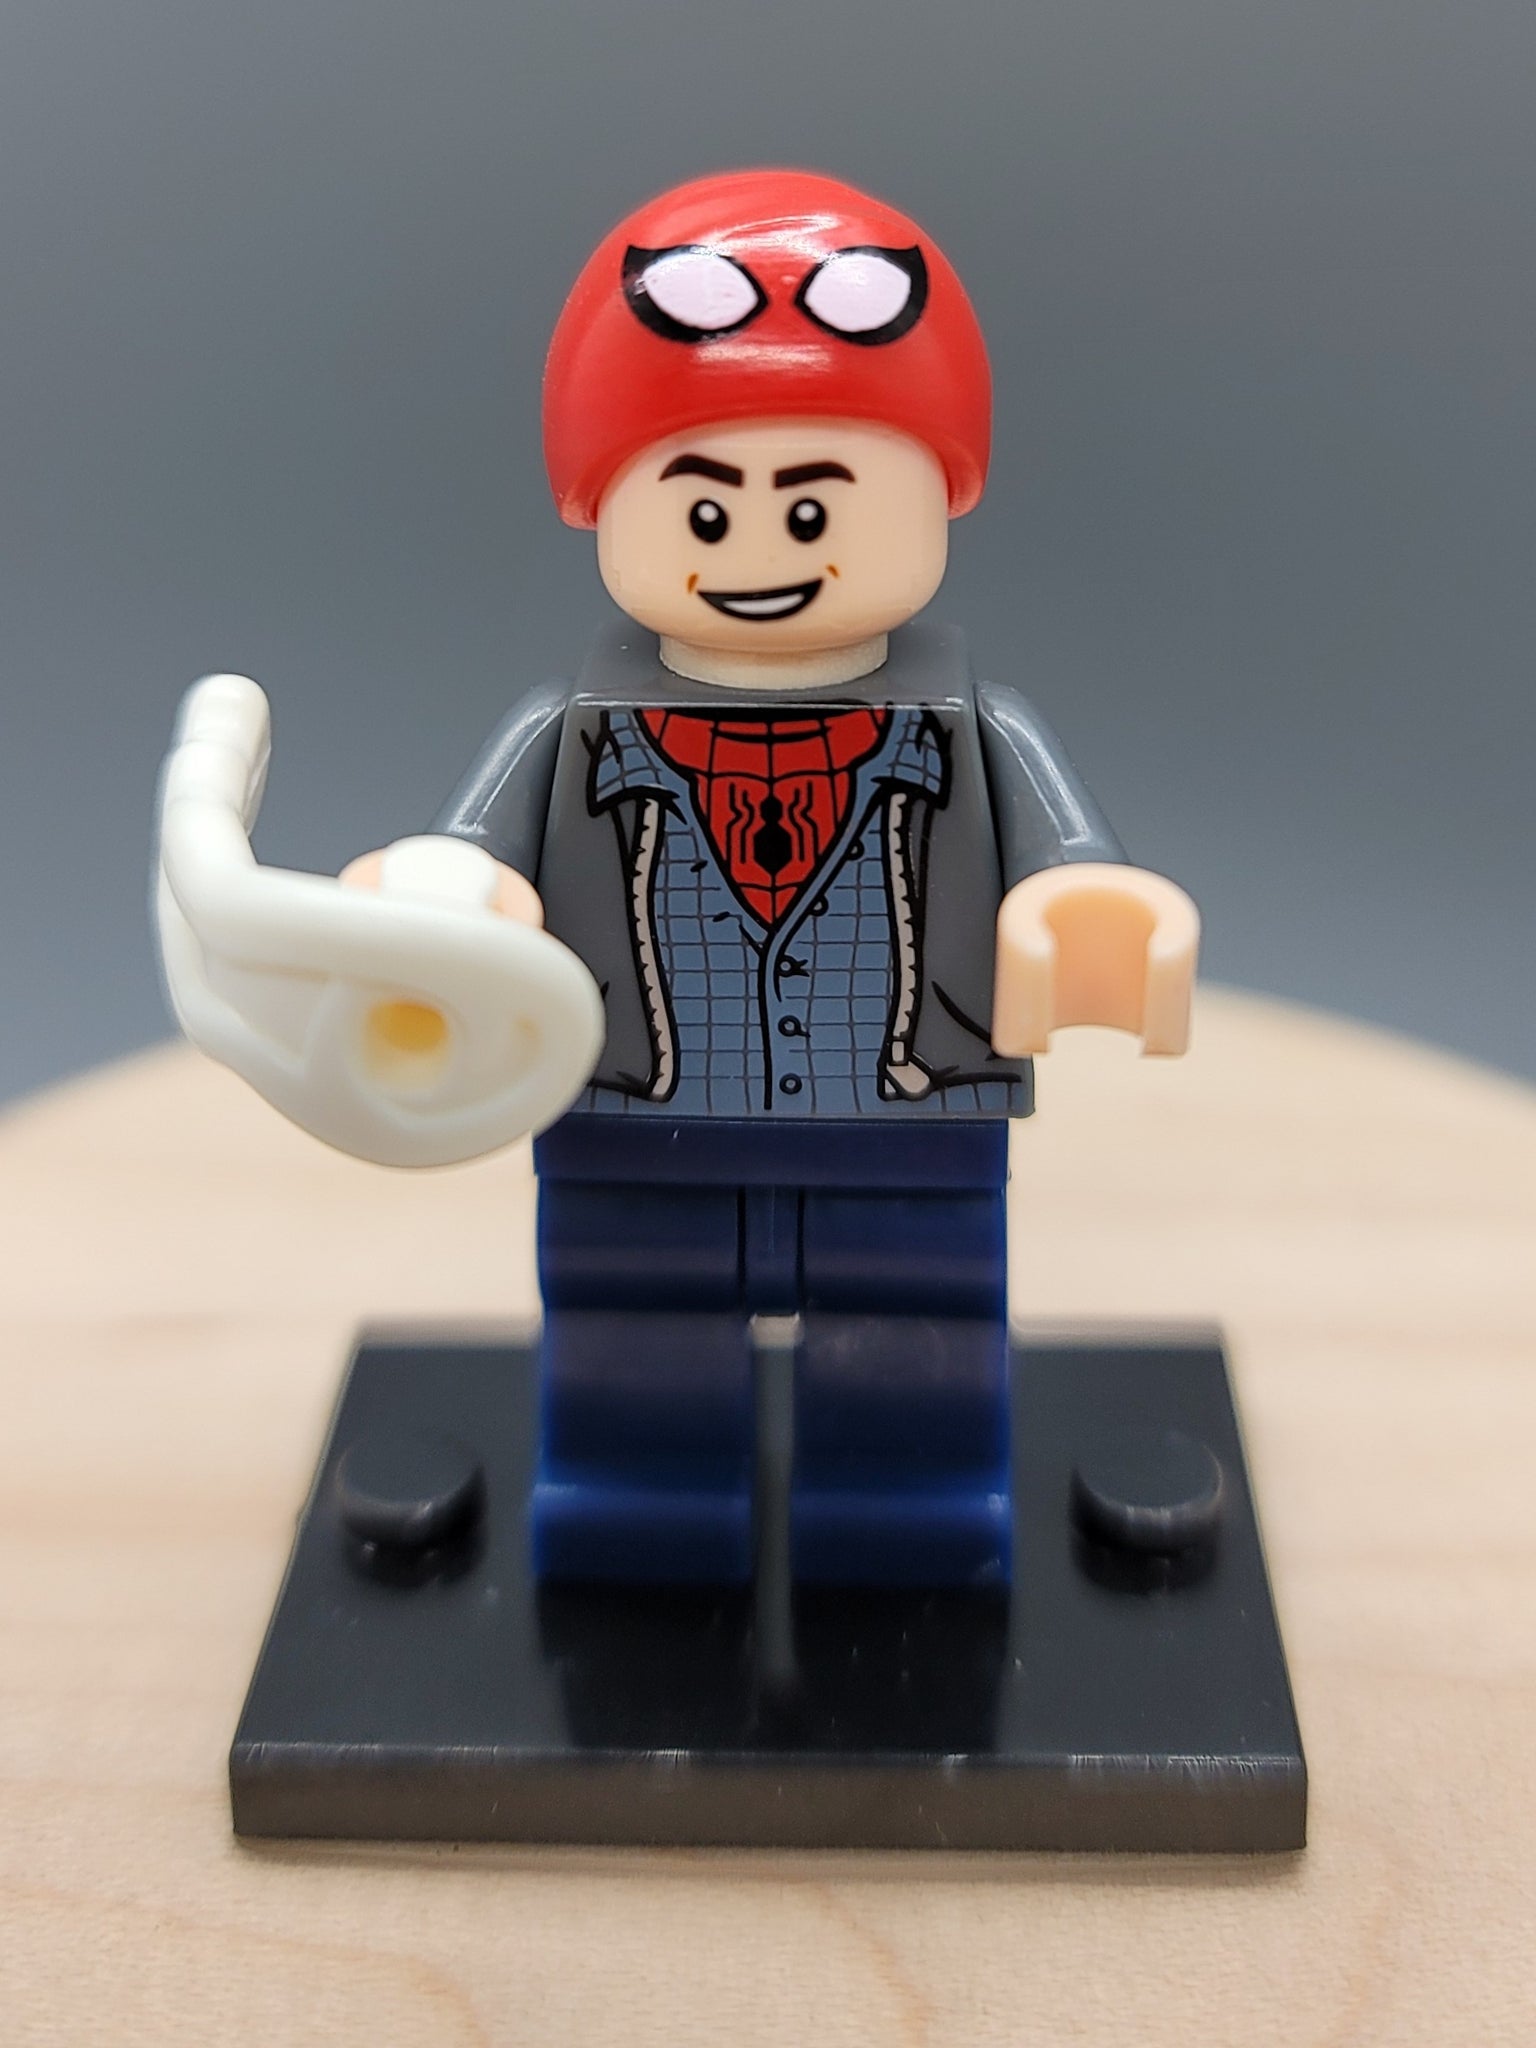 Peter Parker Custom minifigure. Brand new in package. Please visit shop, lots more!